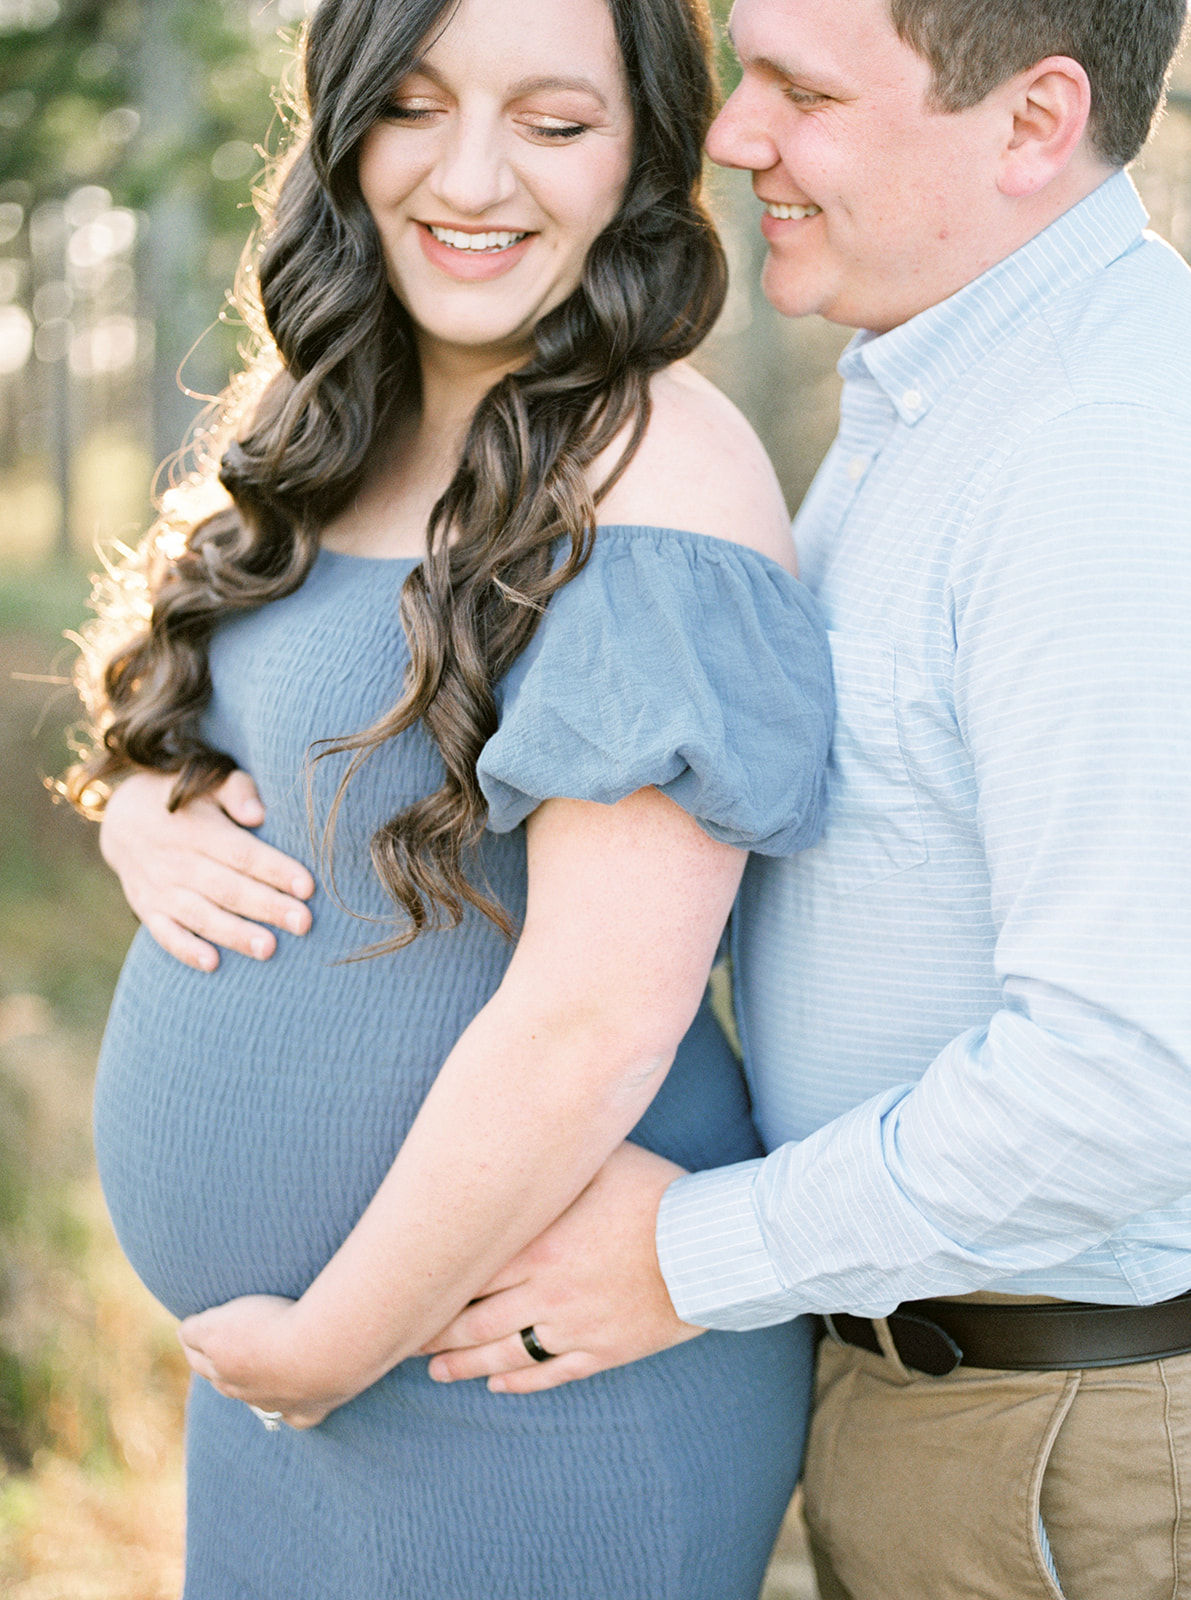 The couple poses at DeKalb County Lake for their spring maternity shoot in Sylvania, Alabama